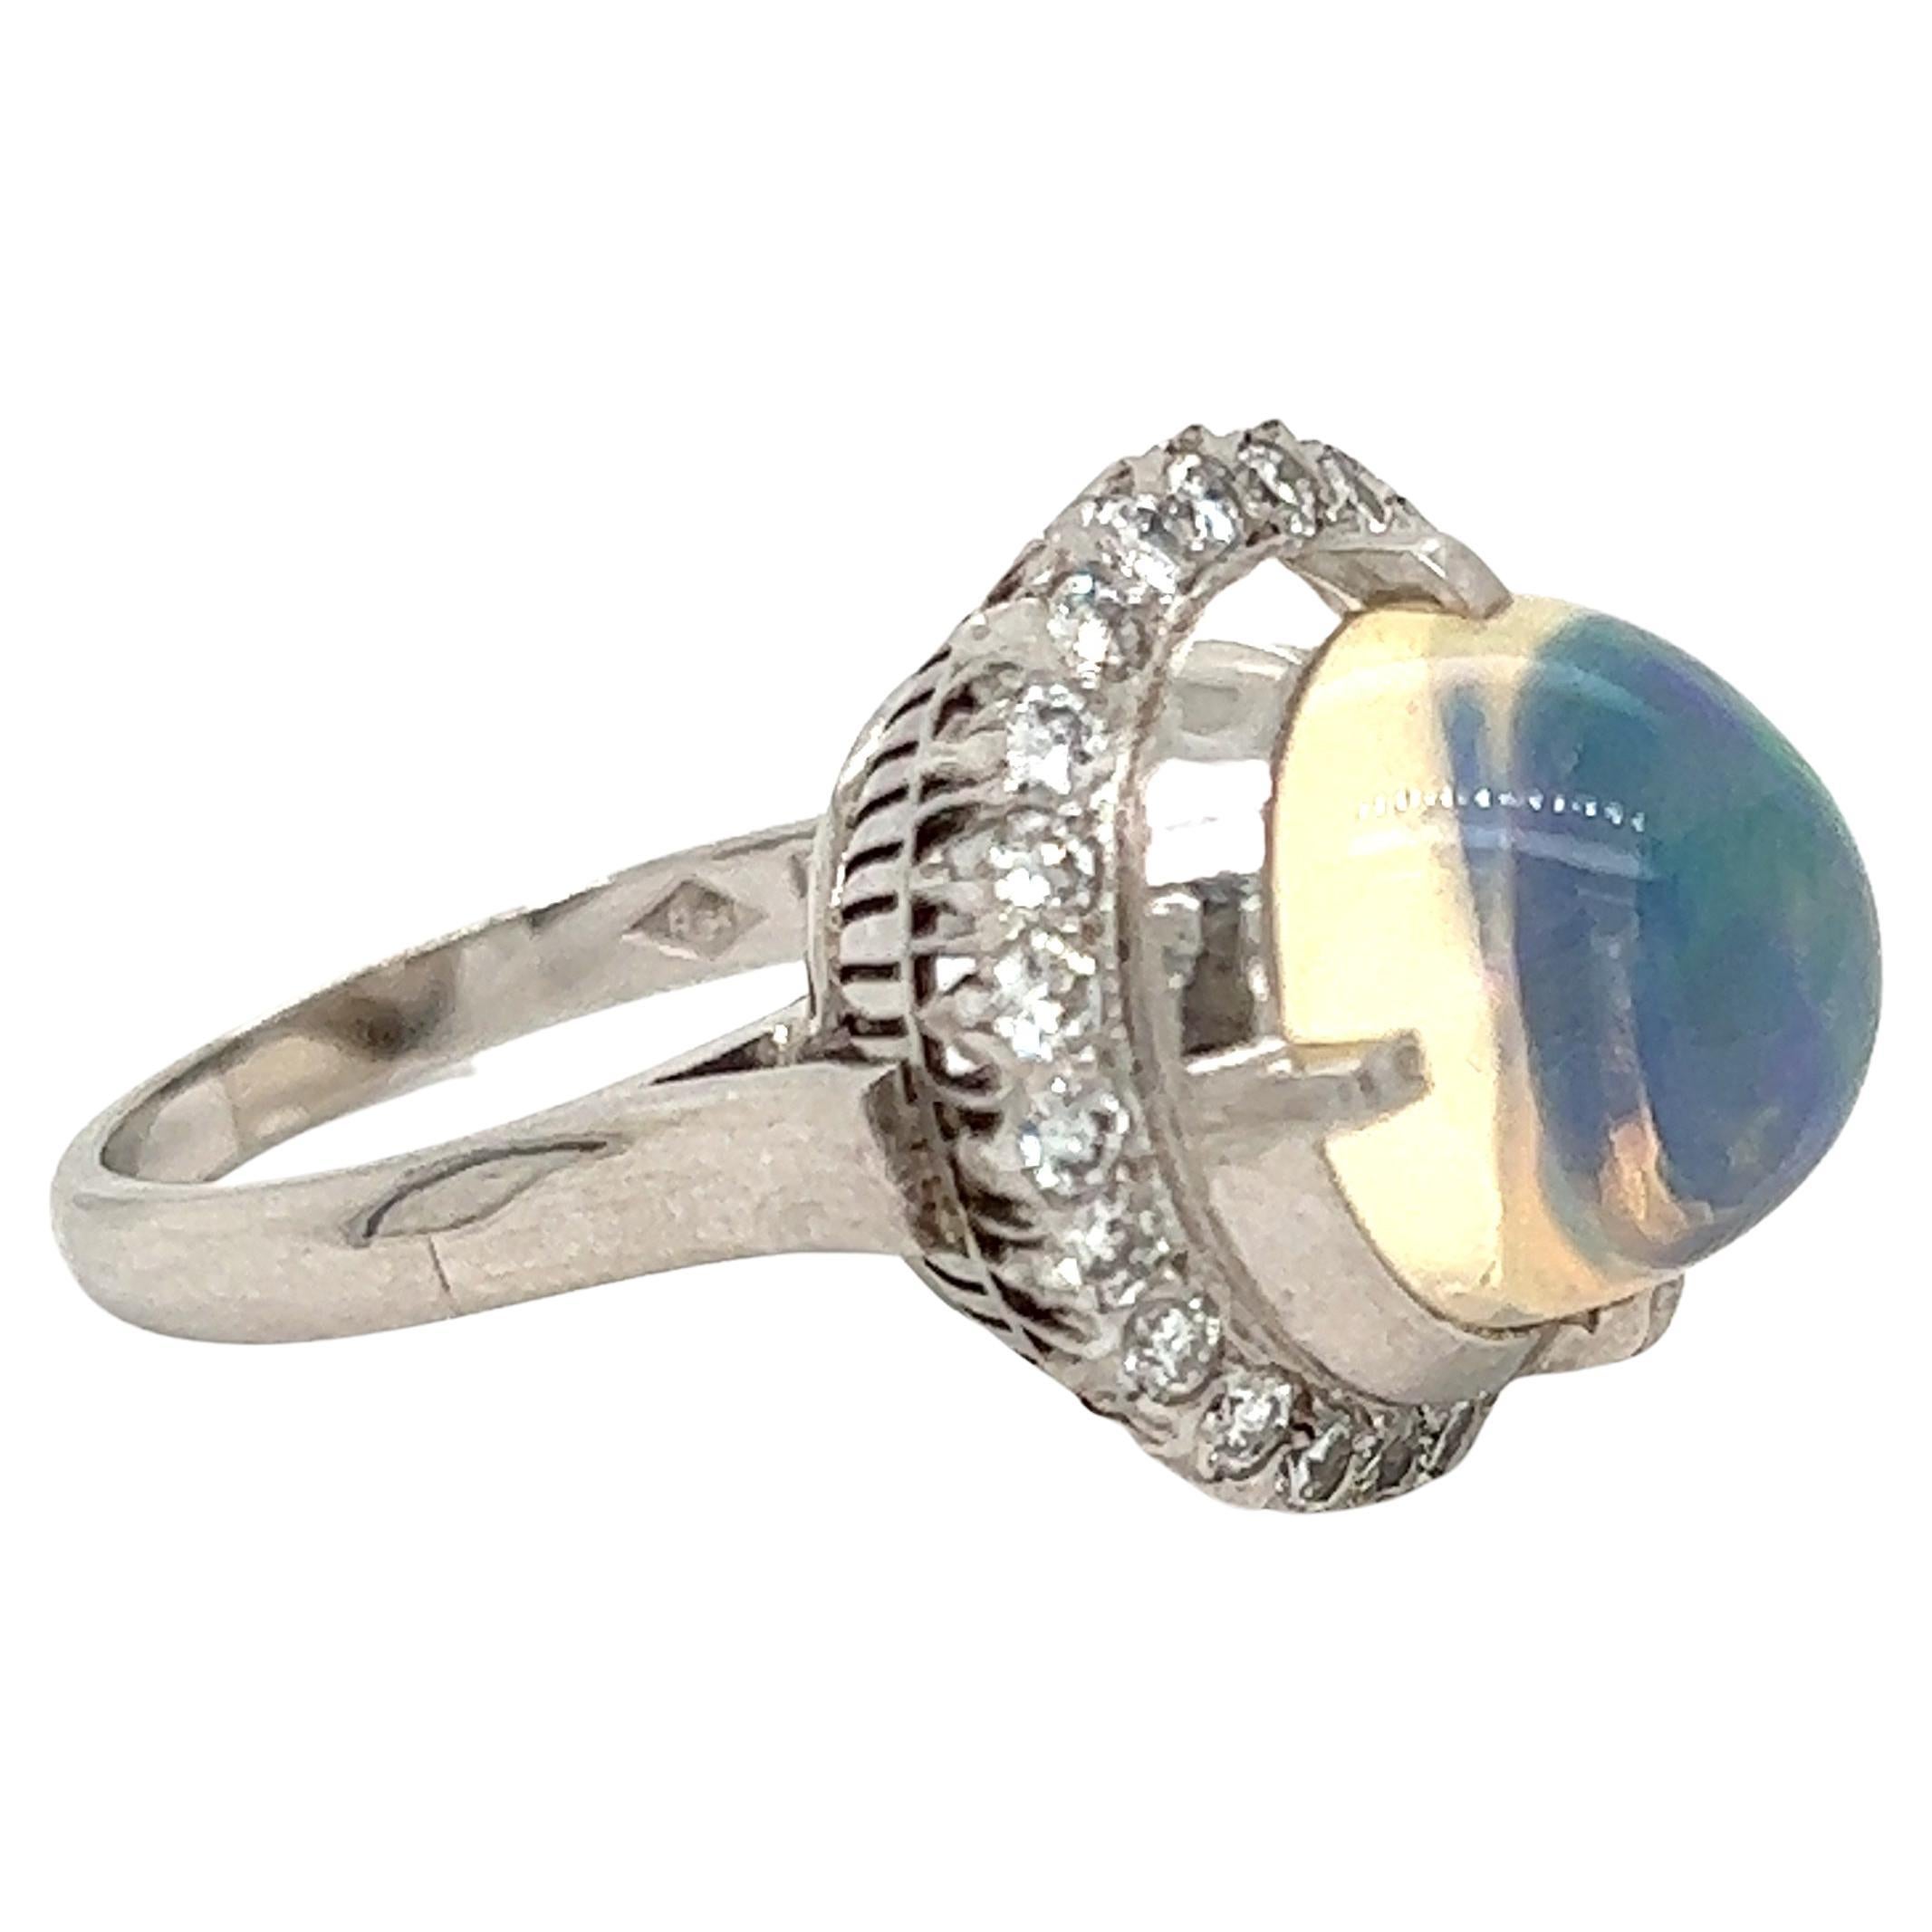 This giant opal and diamond ring is to die for! 5.43 carats of vibrant opal is the centerpiece of this ring, surrounded by 0.90 ctw of diamonds with VS-SI clarity and G-H color. All of the stones are set in 9.00 grams of platinum. 
